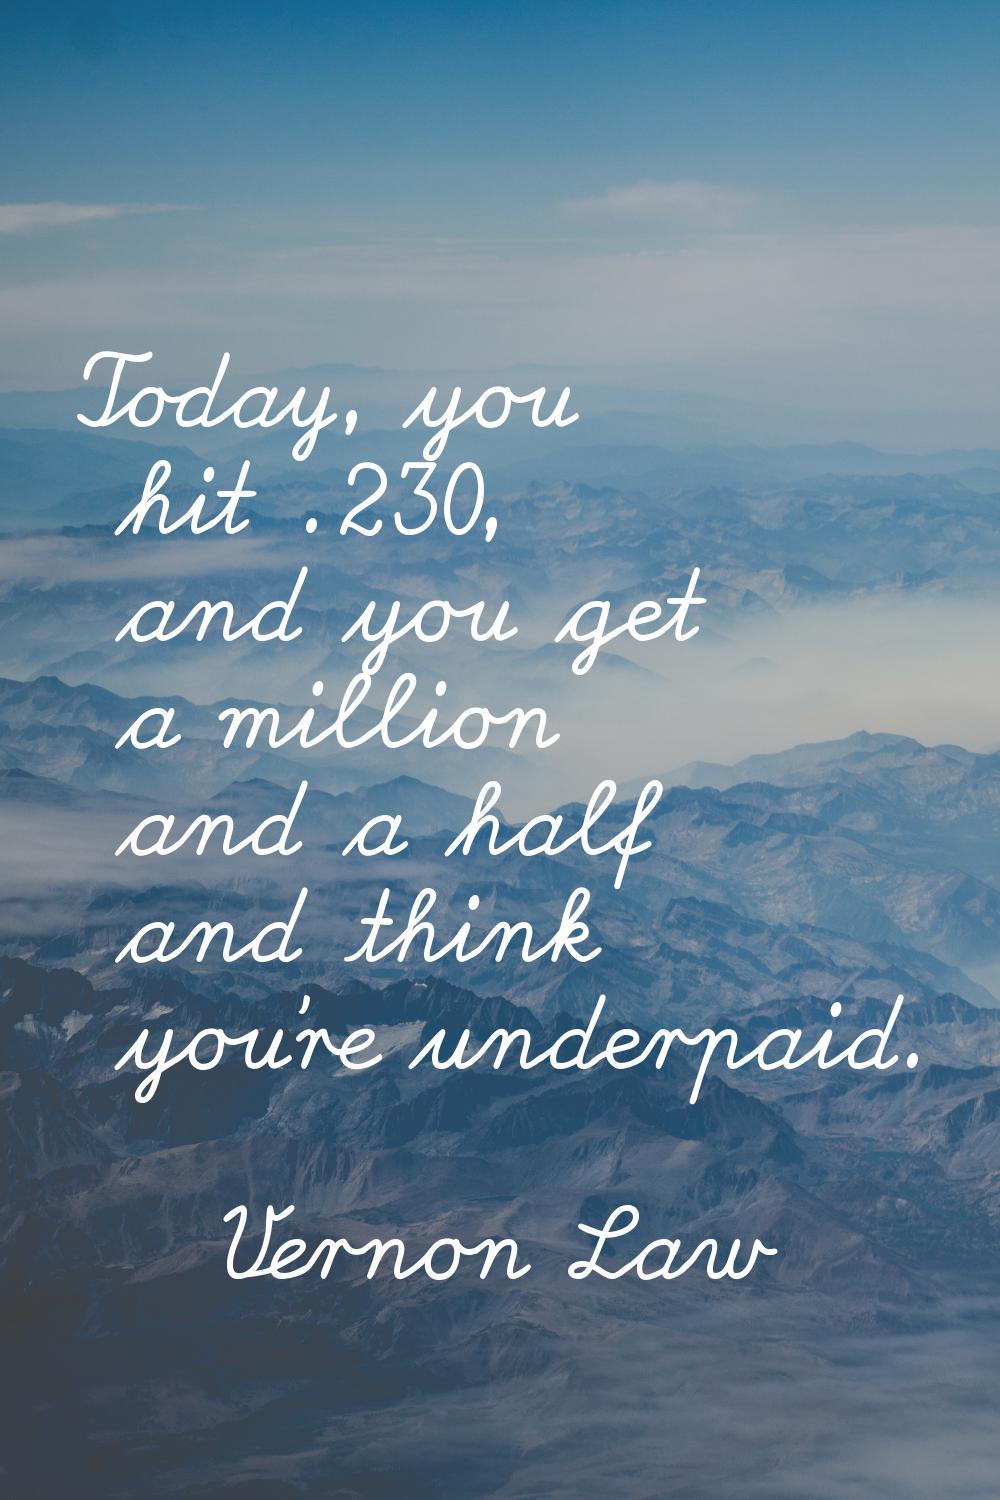 Today, you hit .230, and you get a million and a half and think you're underpaid.